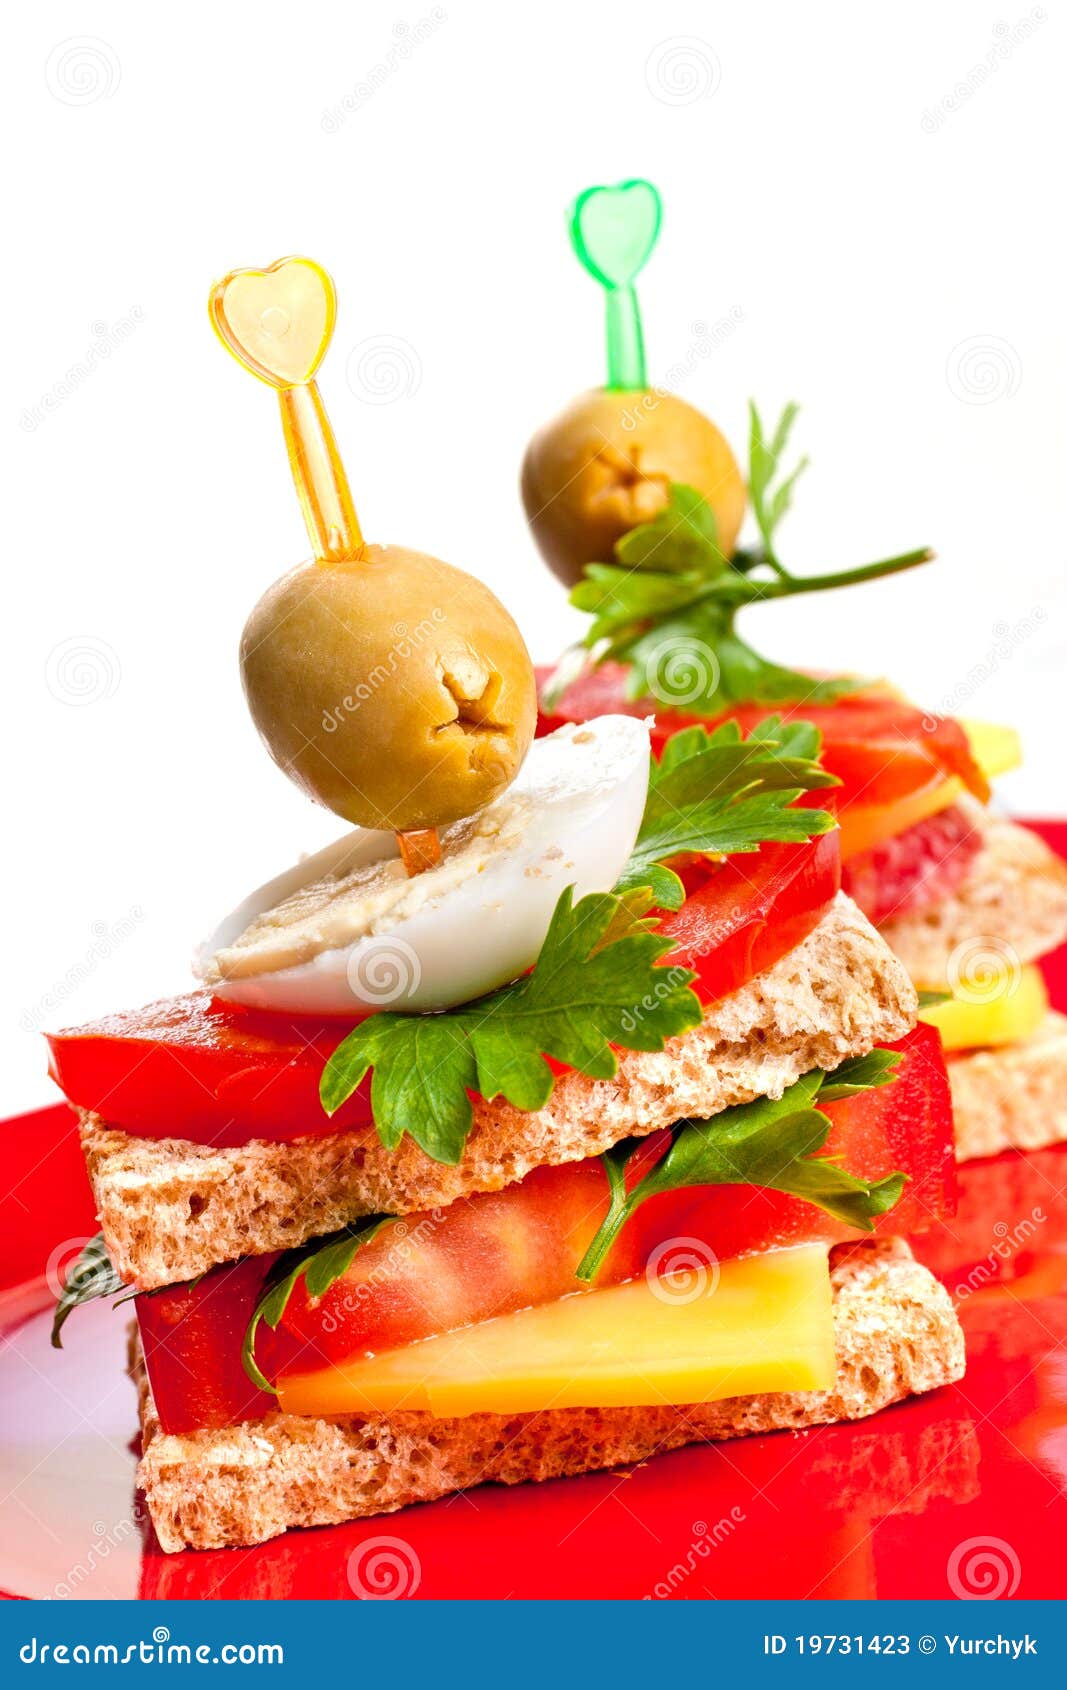 Two appetizer sandwiches stock image. Image of culinary - 19731423